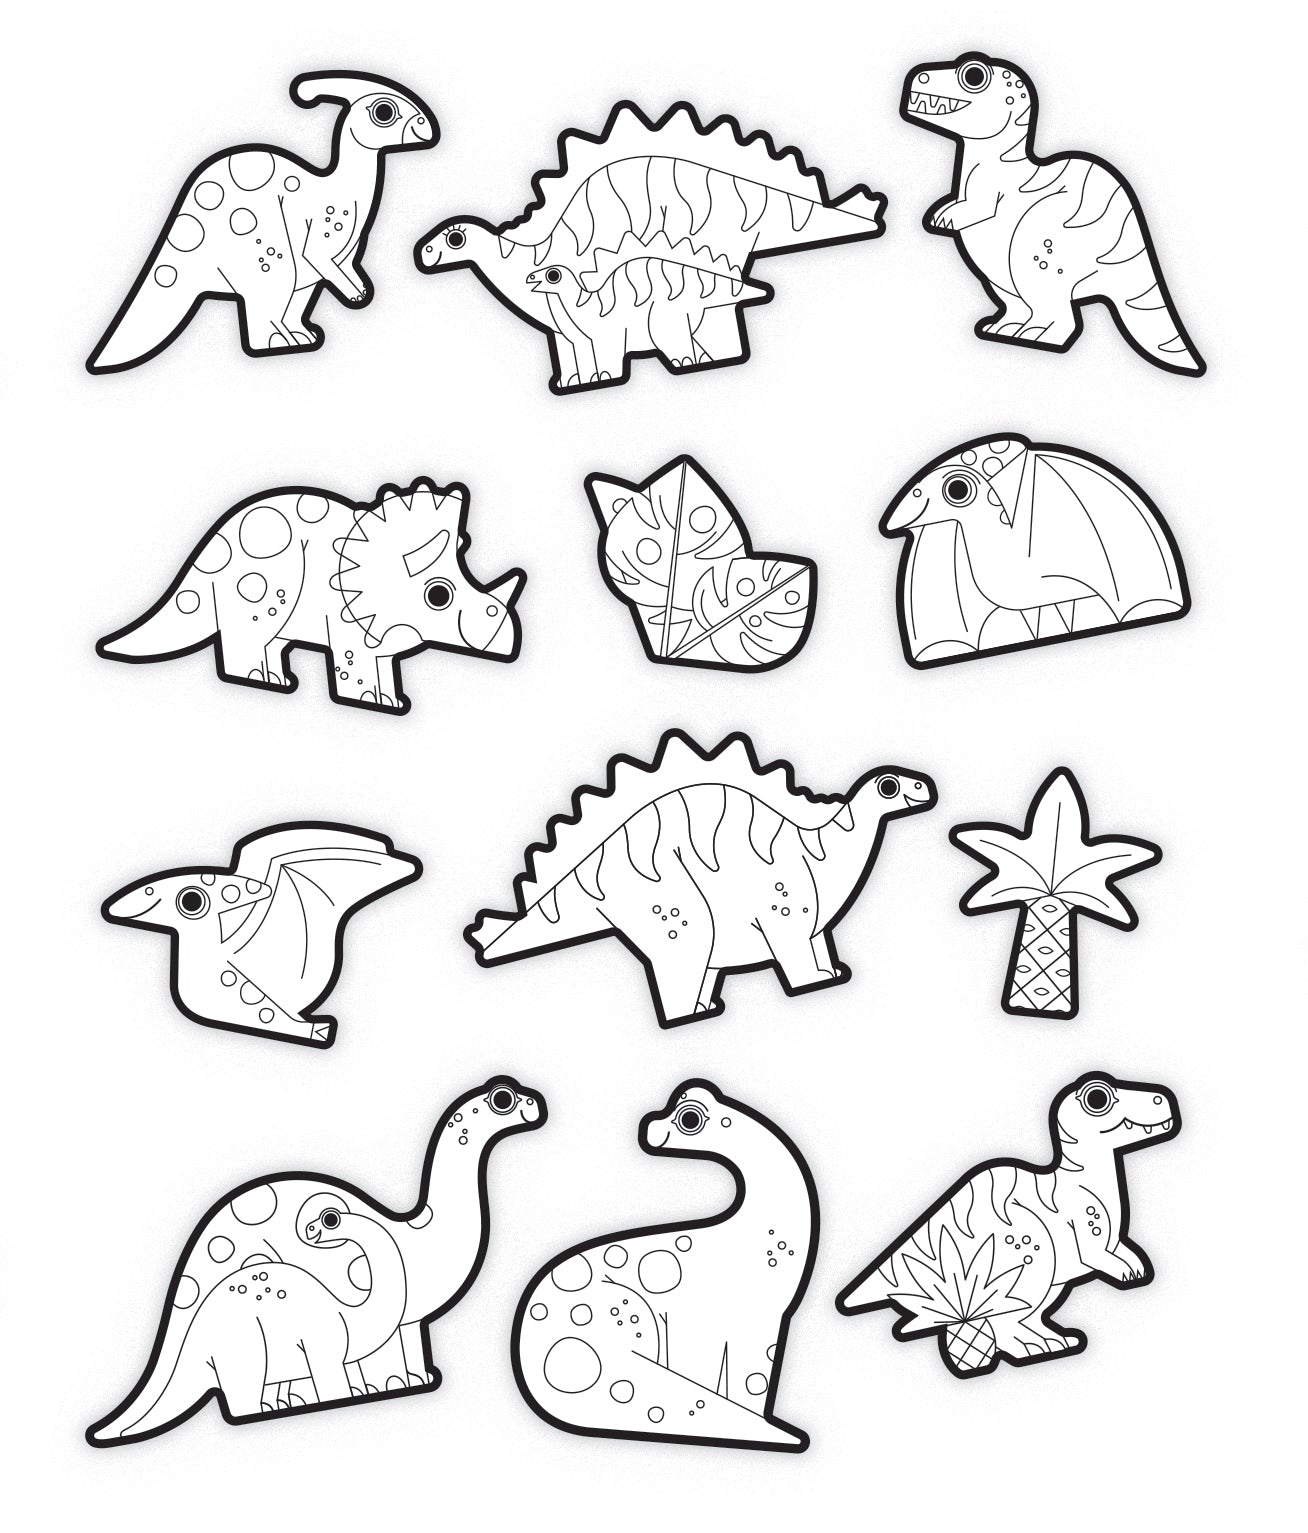 Coloring Stickers - Dinosaurs